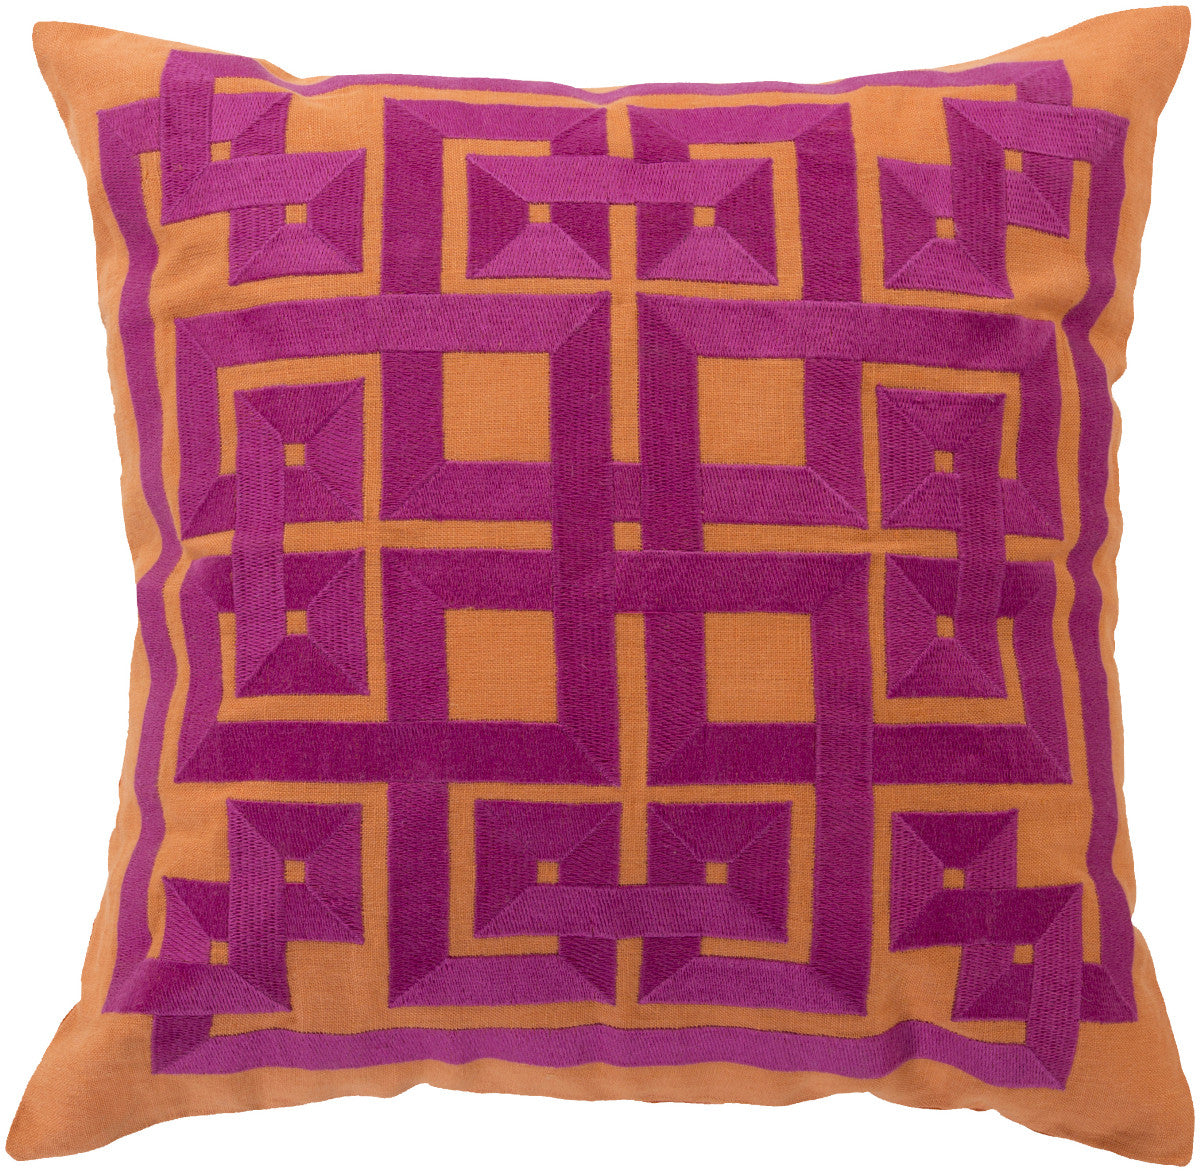 Surya Gramercy Intersected Geometrics LD-014 Pillow by Beth Lacefield